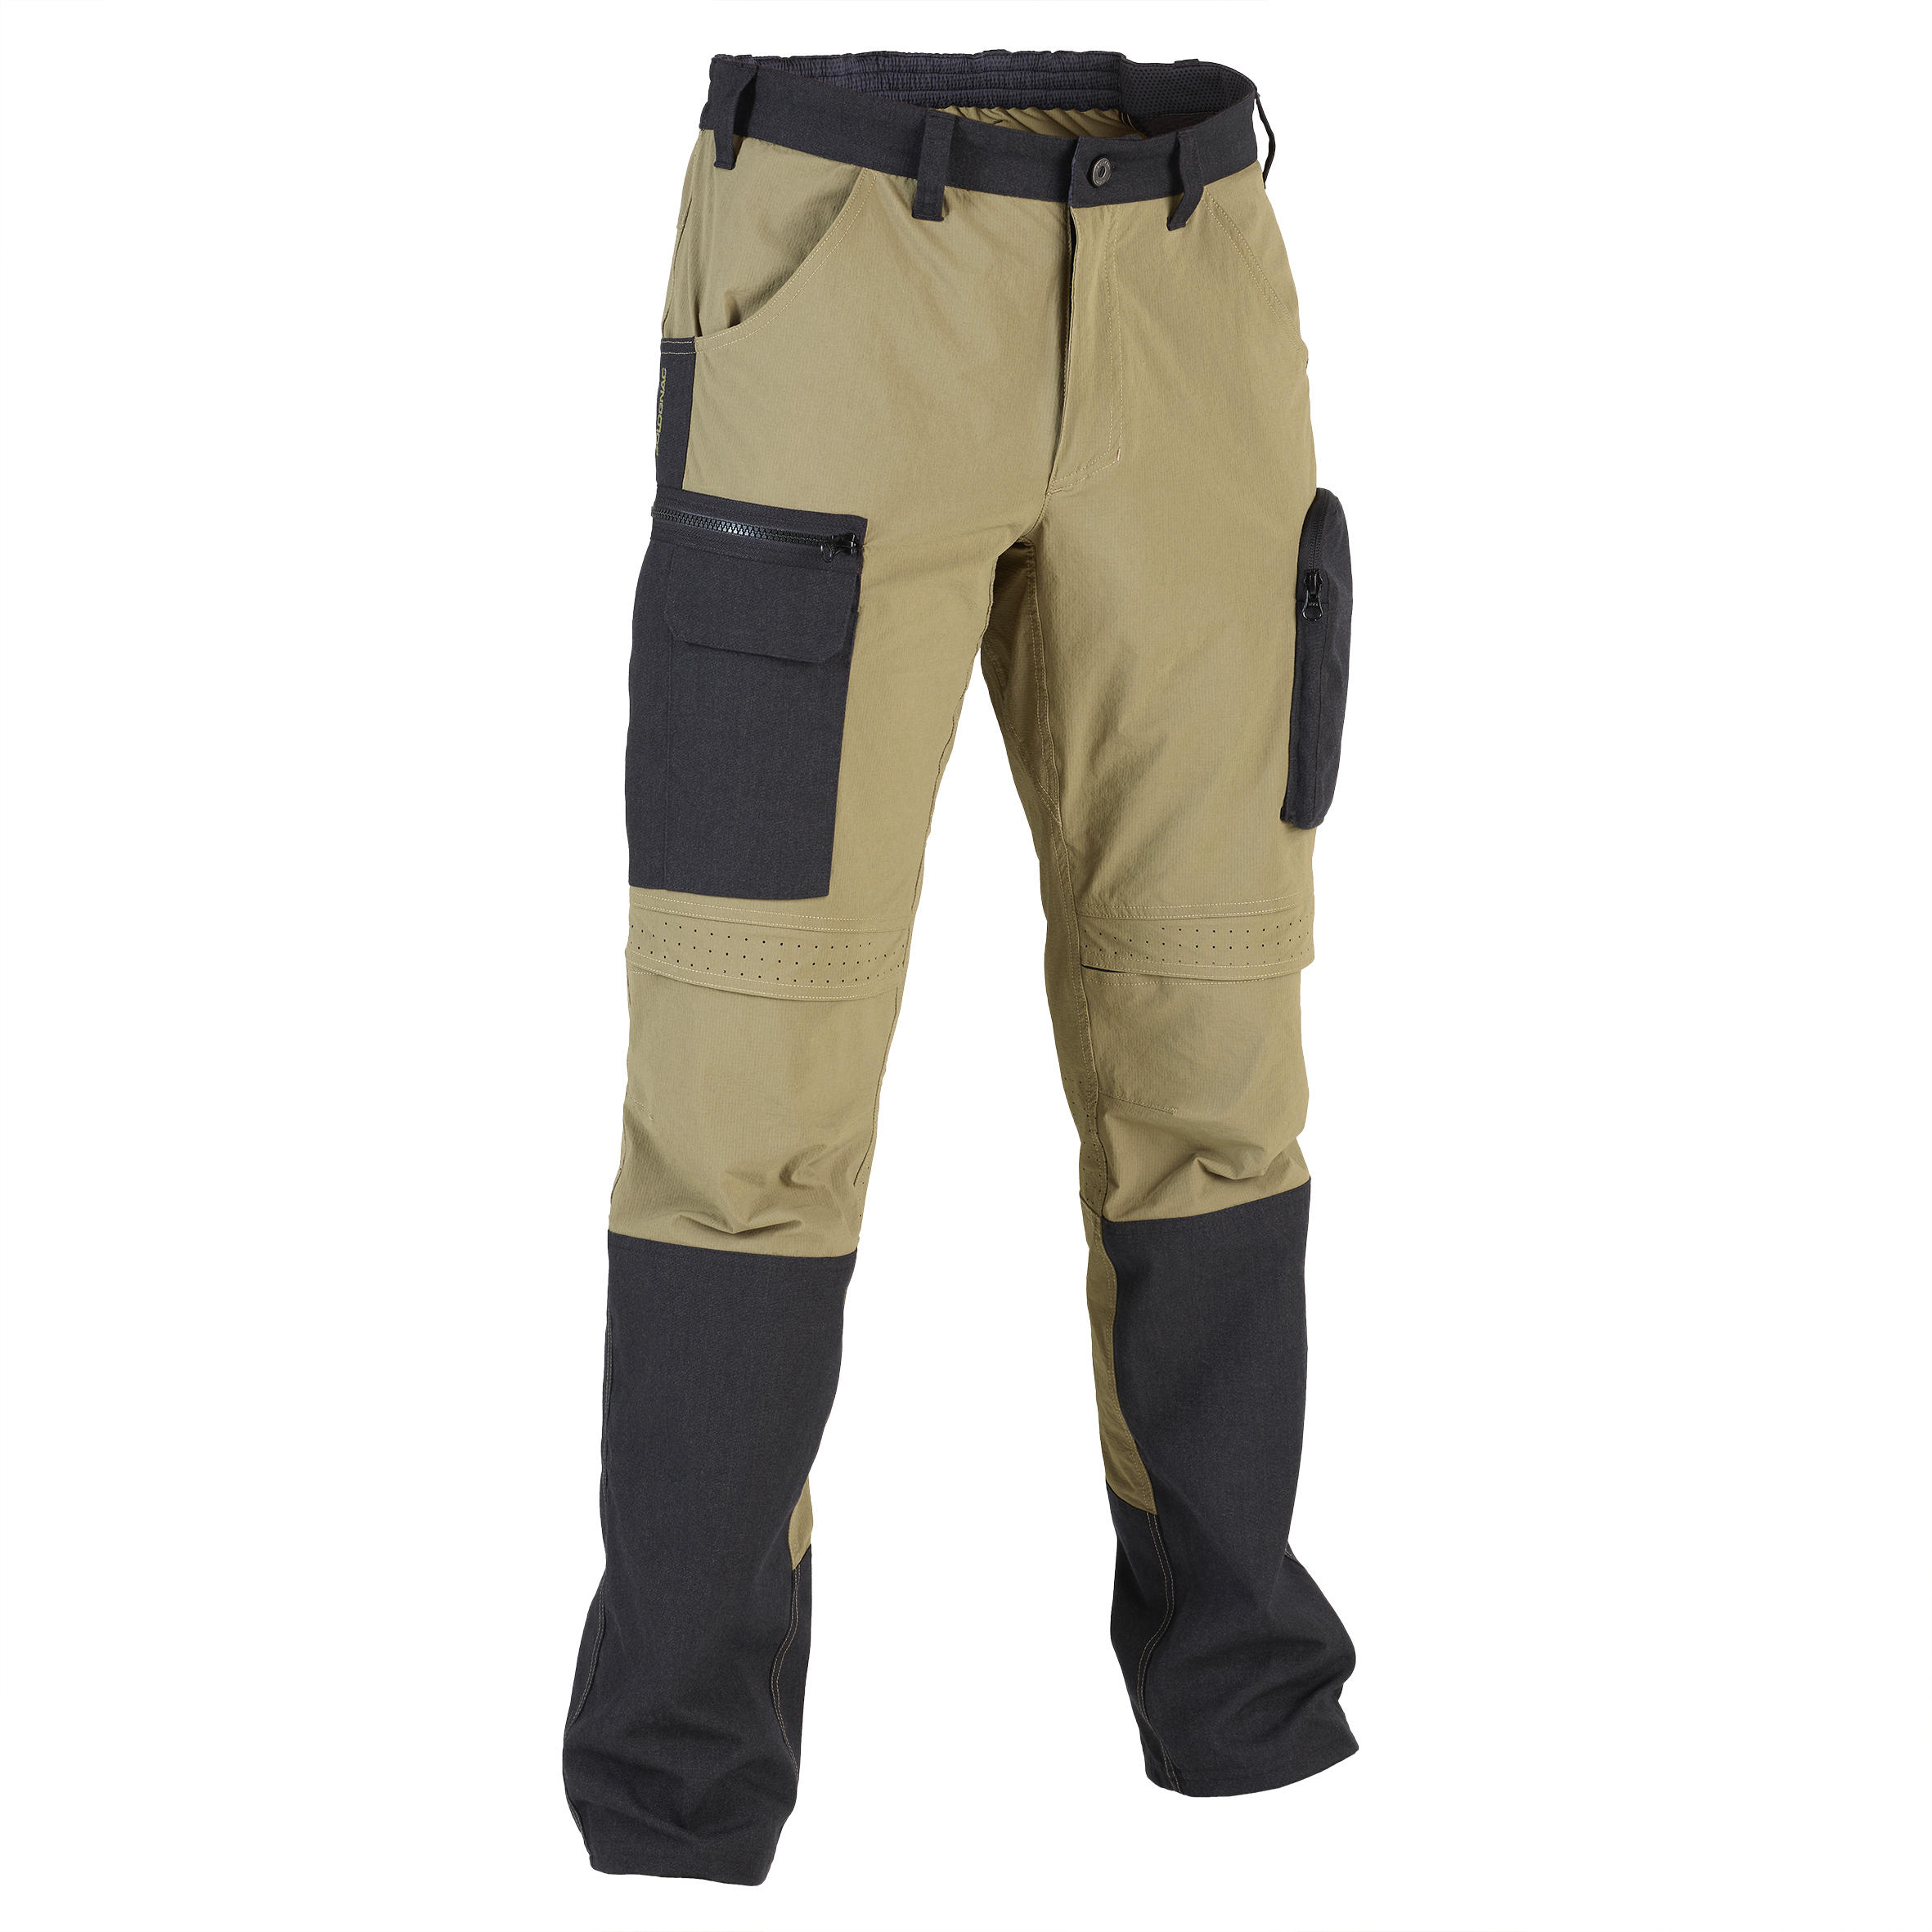 Solognac Lightweight Breathable Trousers - Light Green